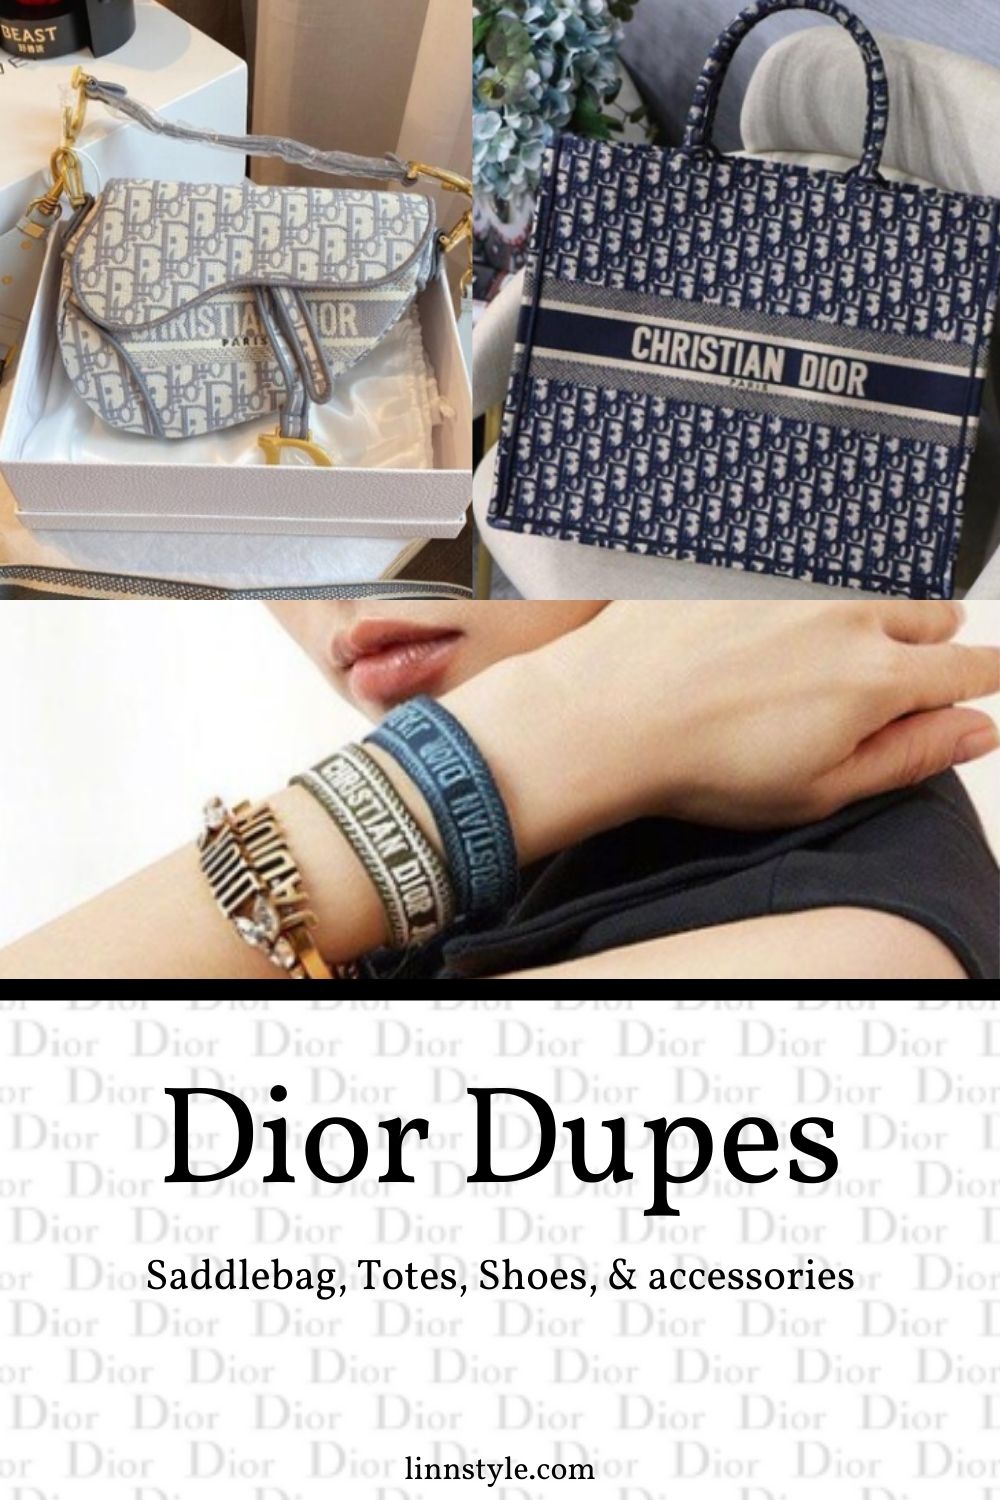 Lady Dior Bag vs High Street Dupes - ALLINSTYLE - Your source fashion news  & styling tips